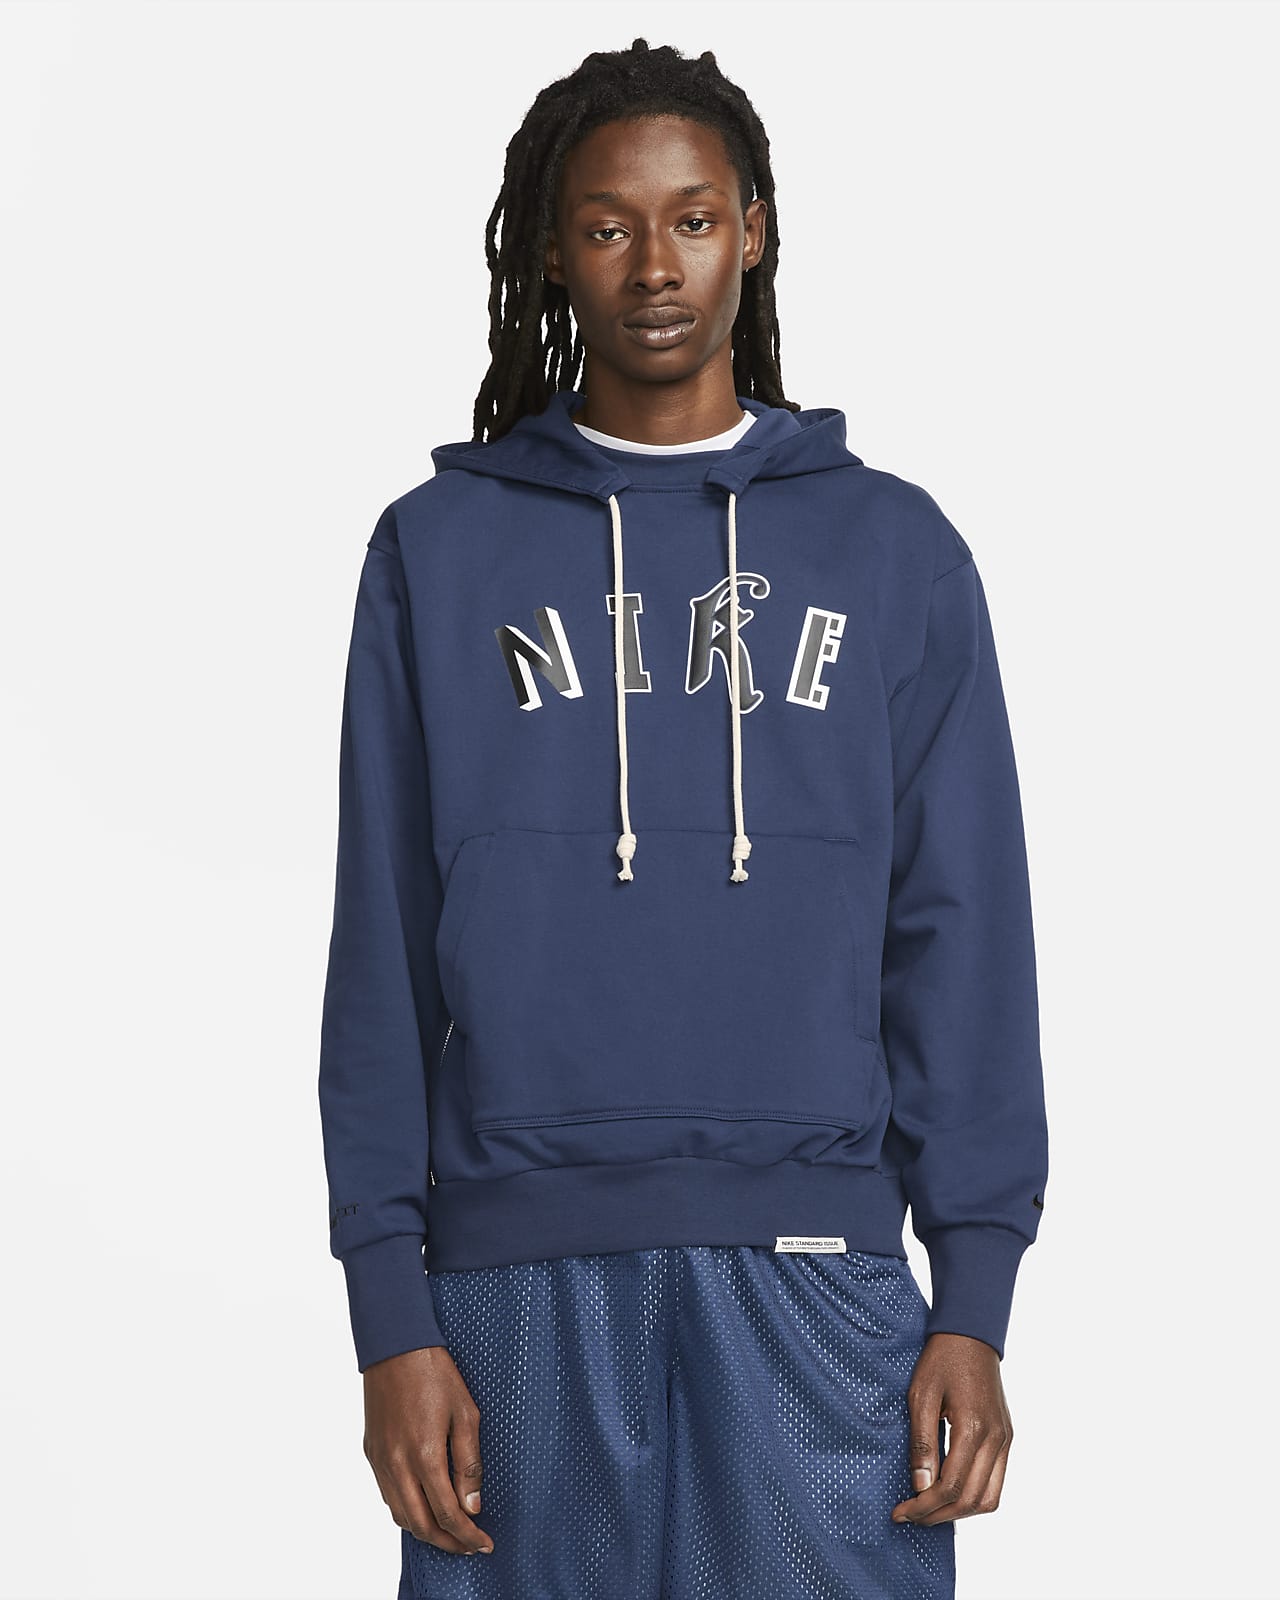 Nike Men's Dri-FIT Standard Issue Basketball Pullover Hoodie in